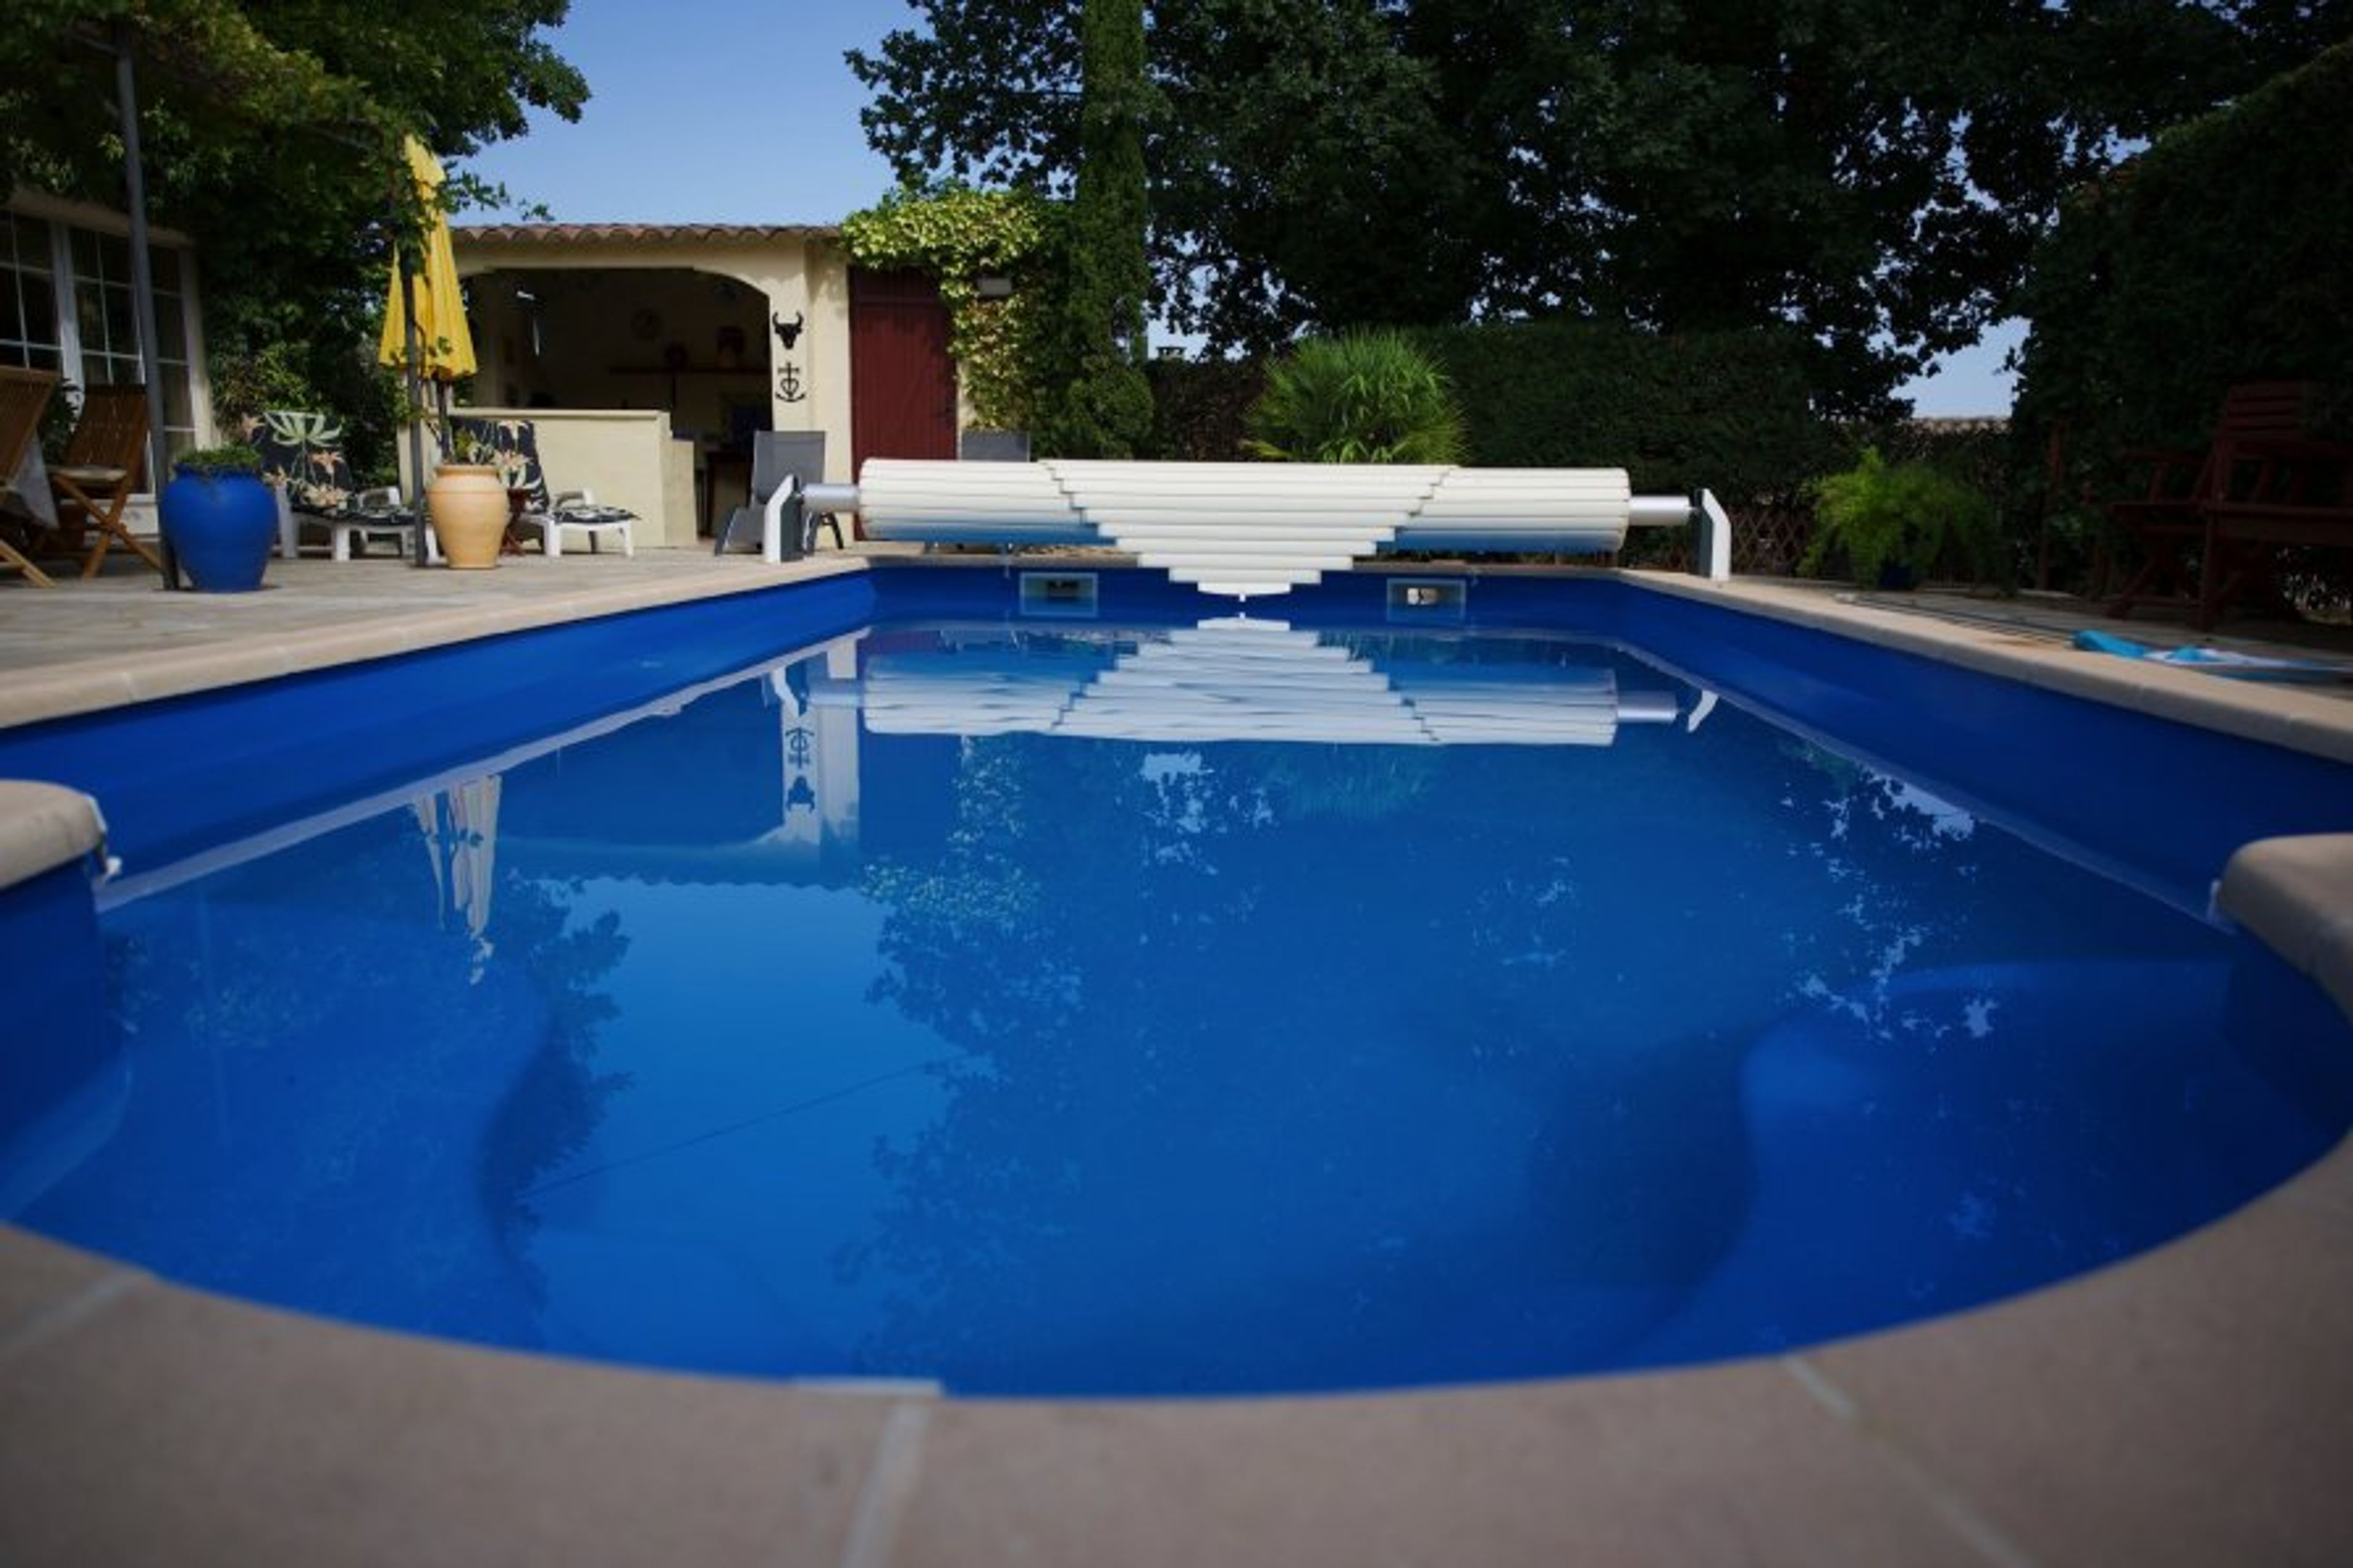 Large graduated pool with security cover
for kids & animals